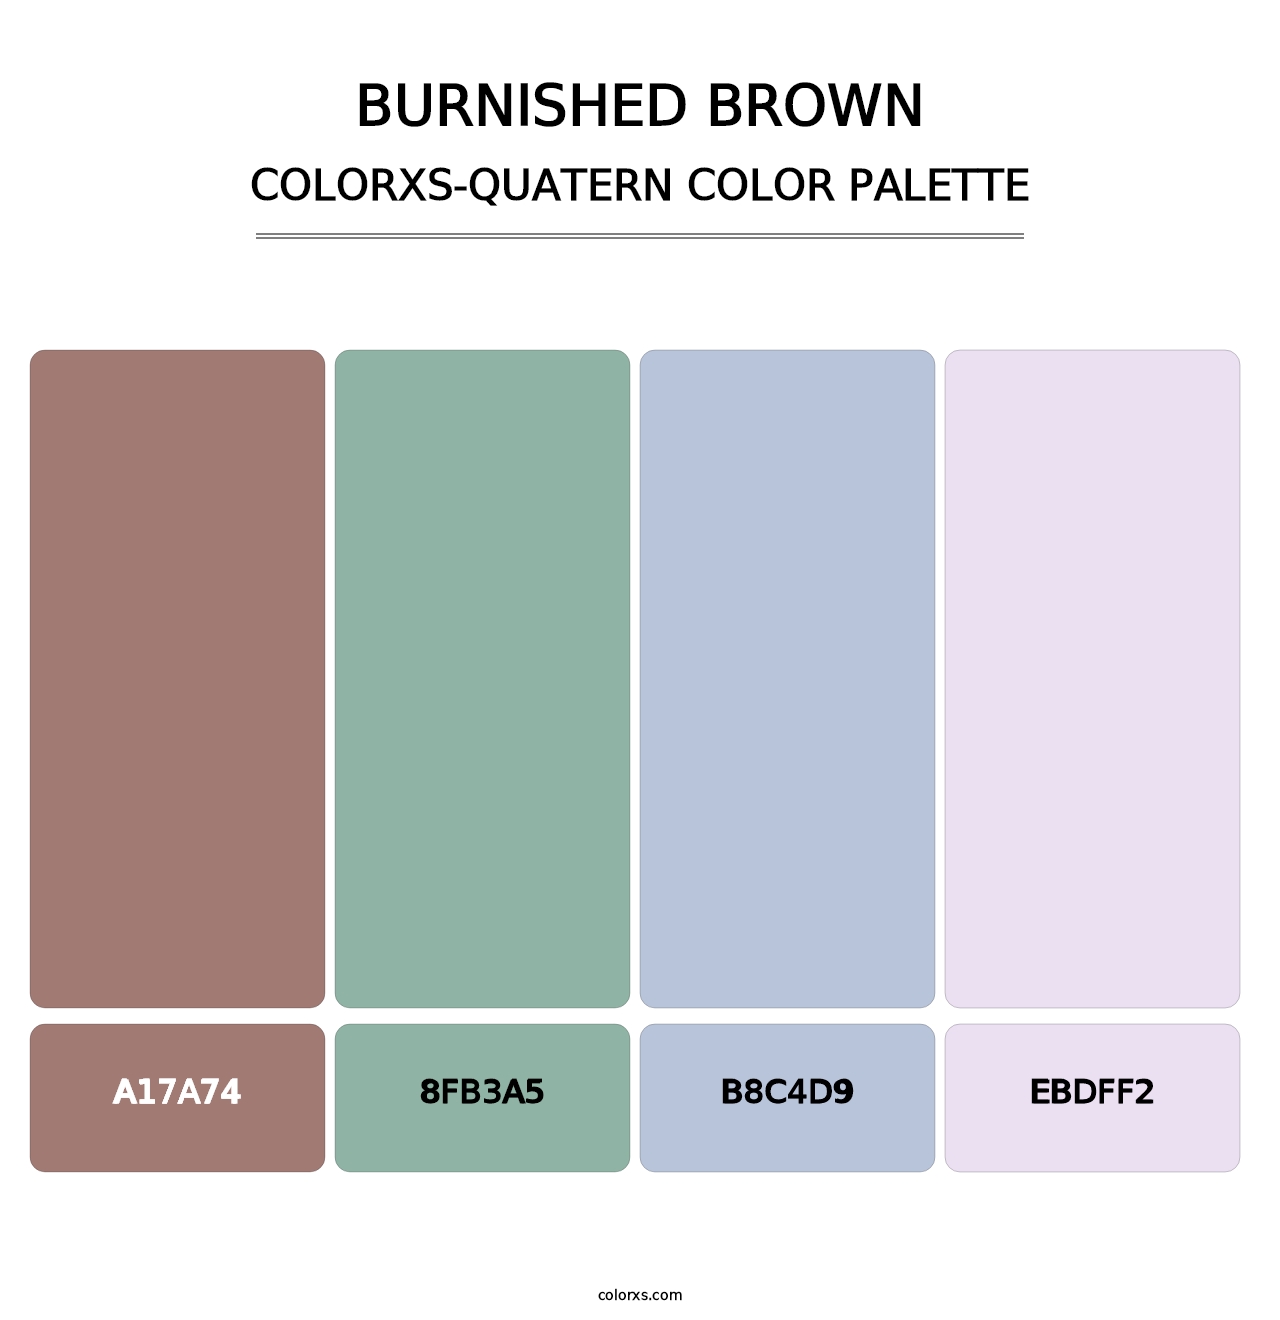 Burnished Brown - Colorxs Quatern Palette